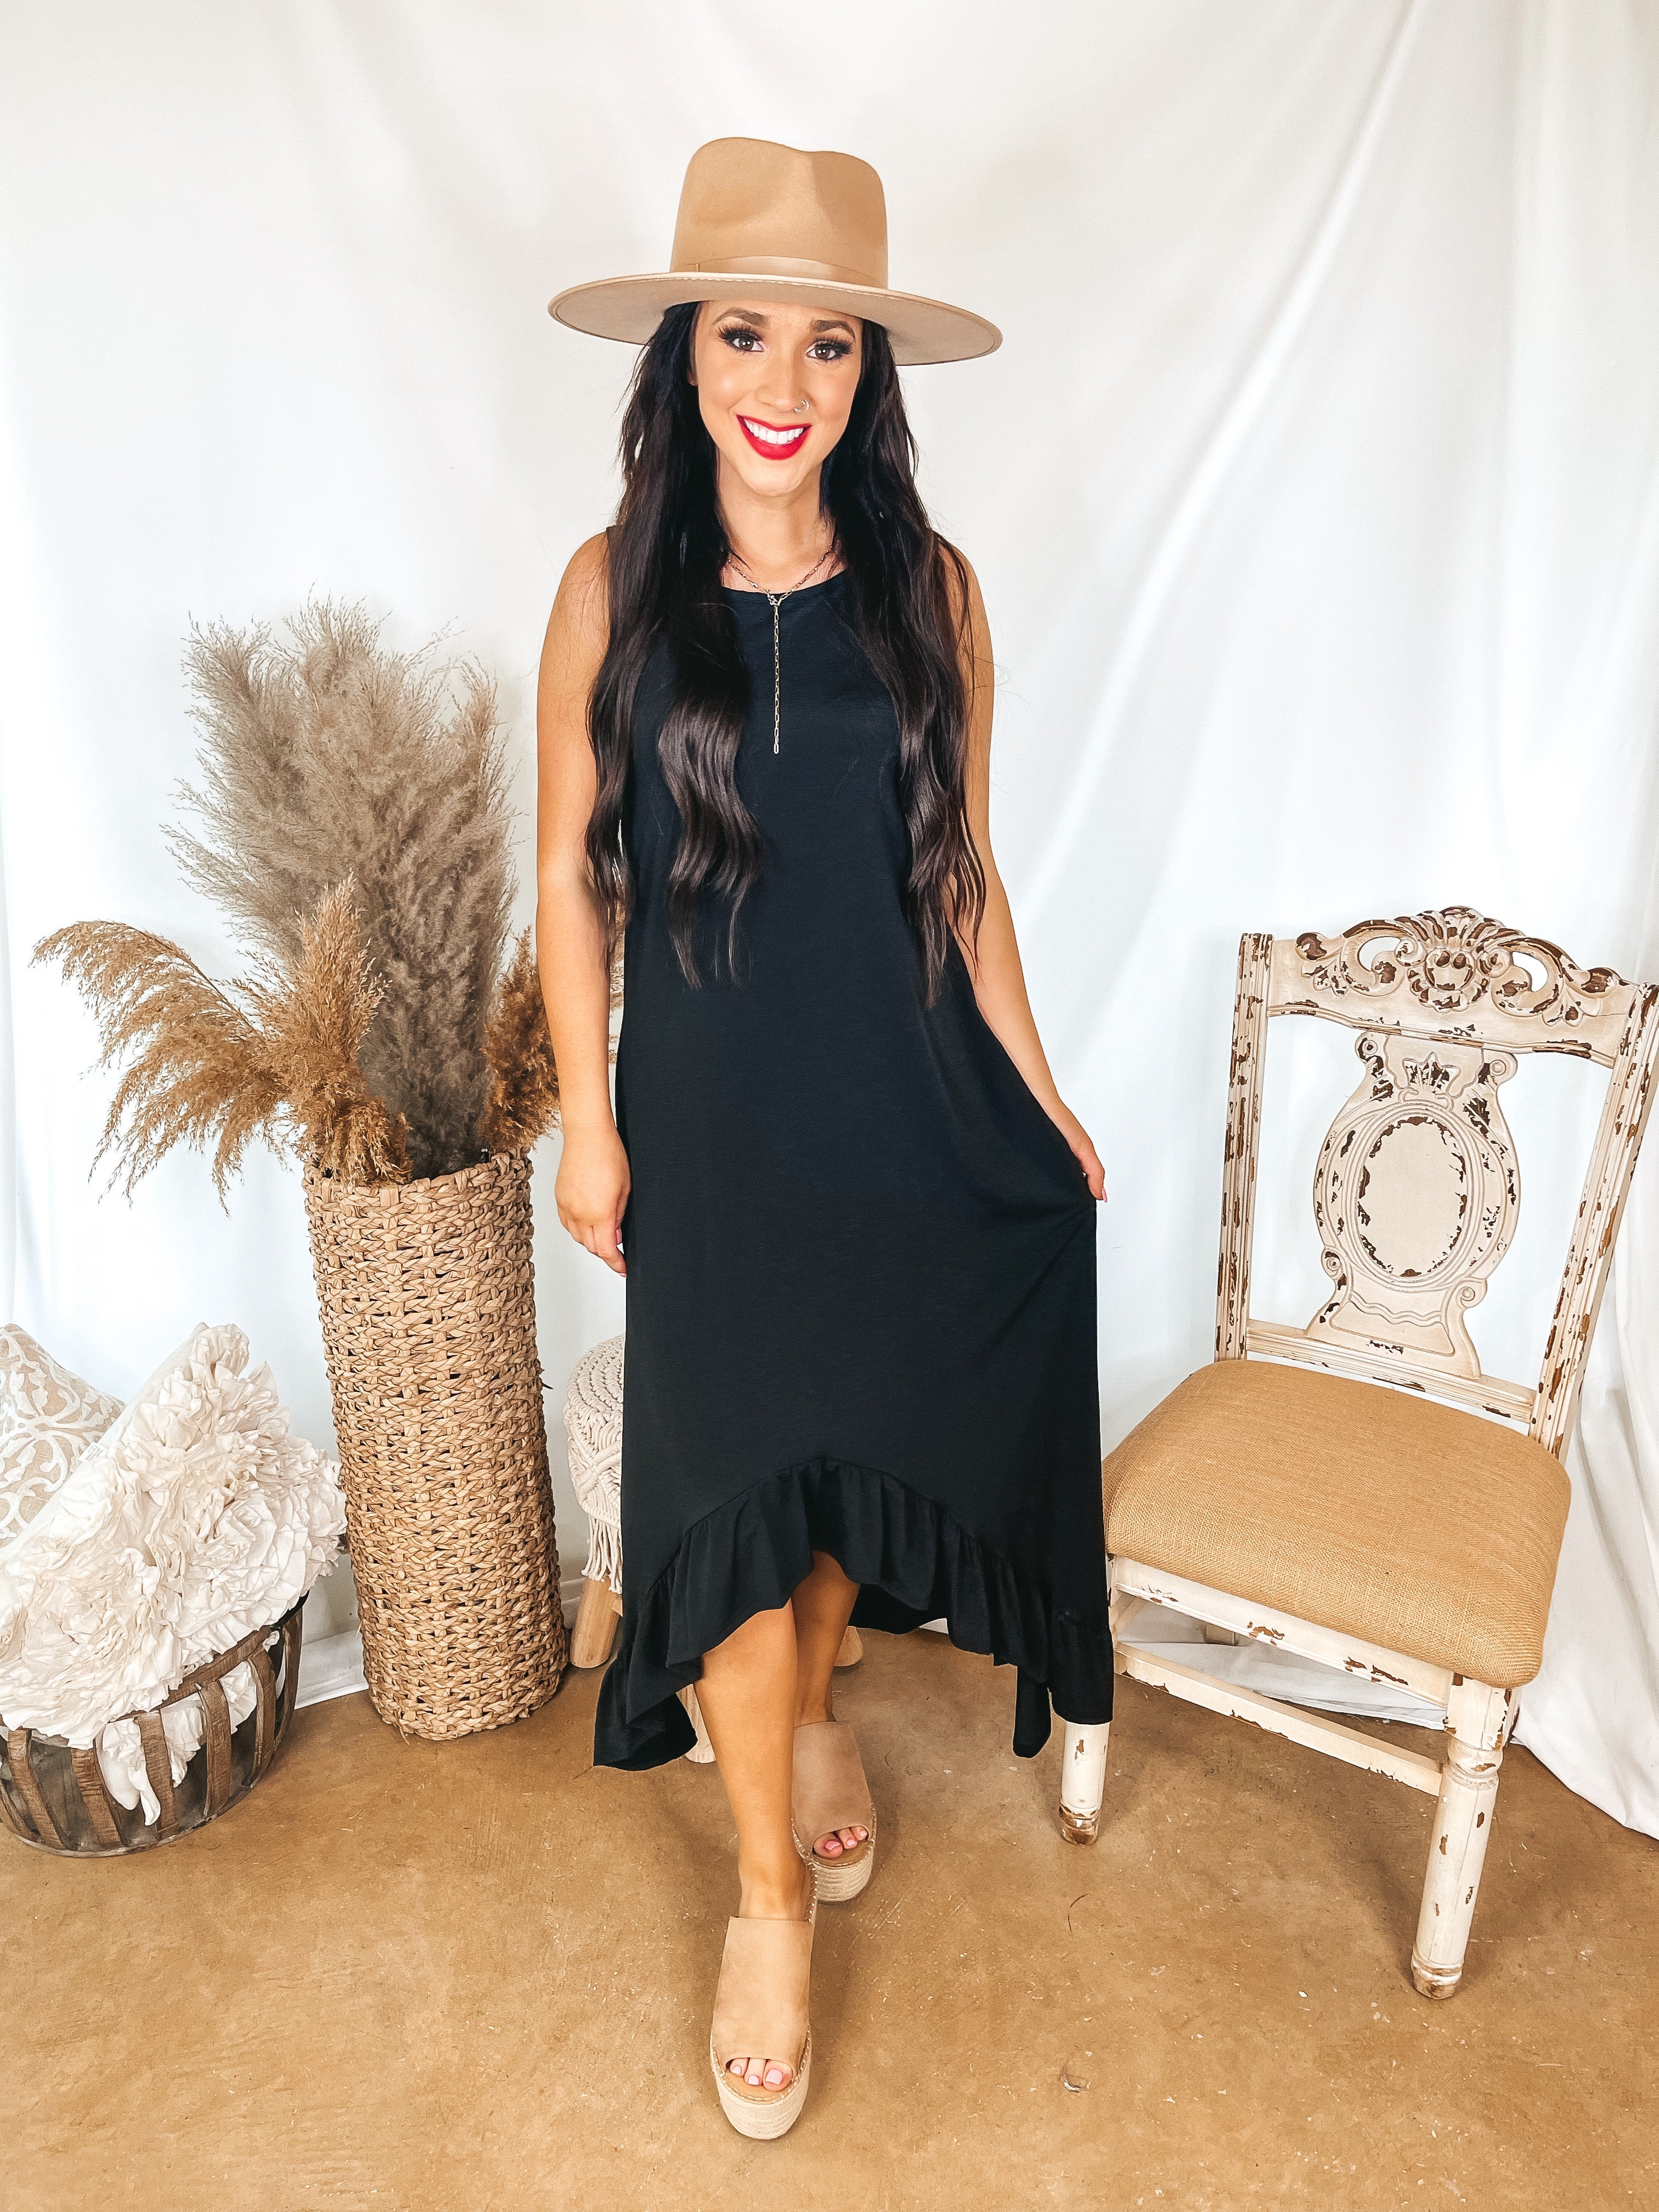 Make It Good High Low Tank Top Dress with Ruffle Hem in Black - Giddy Up Glamour Boutique